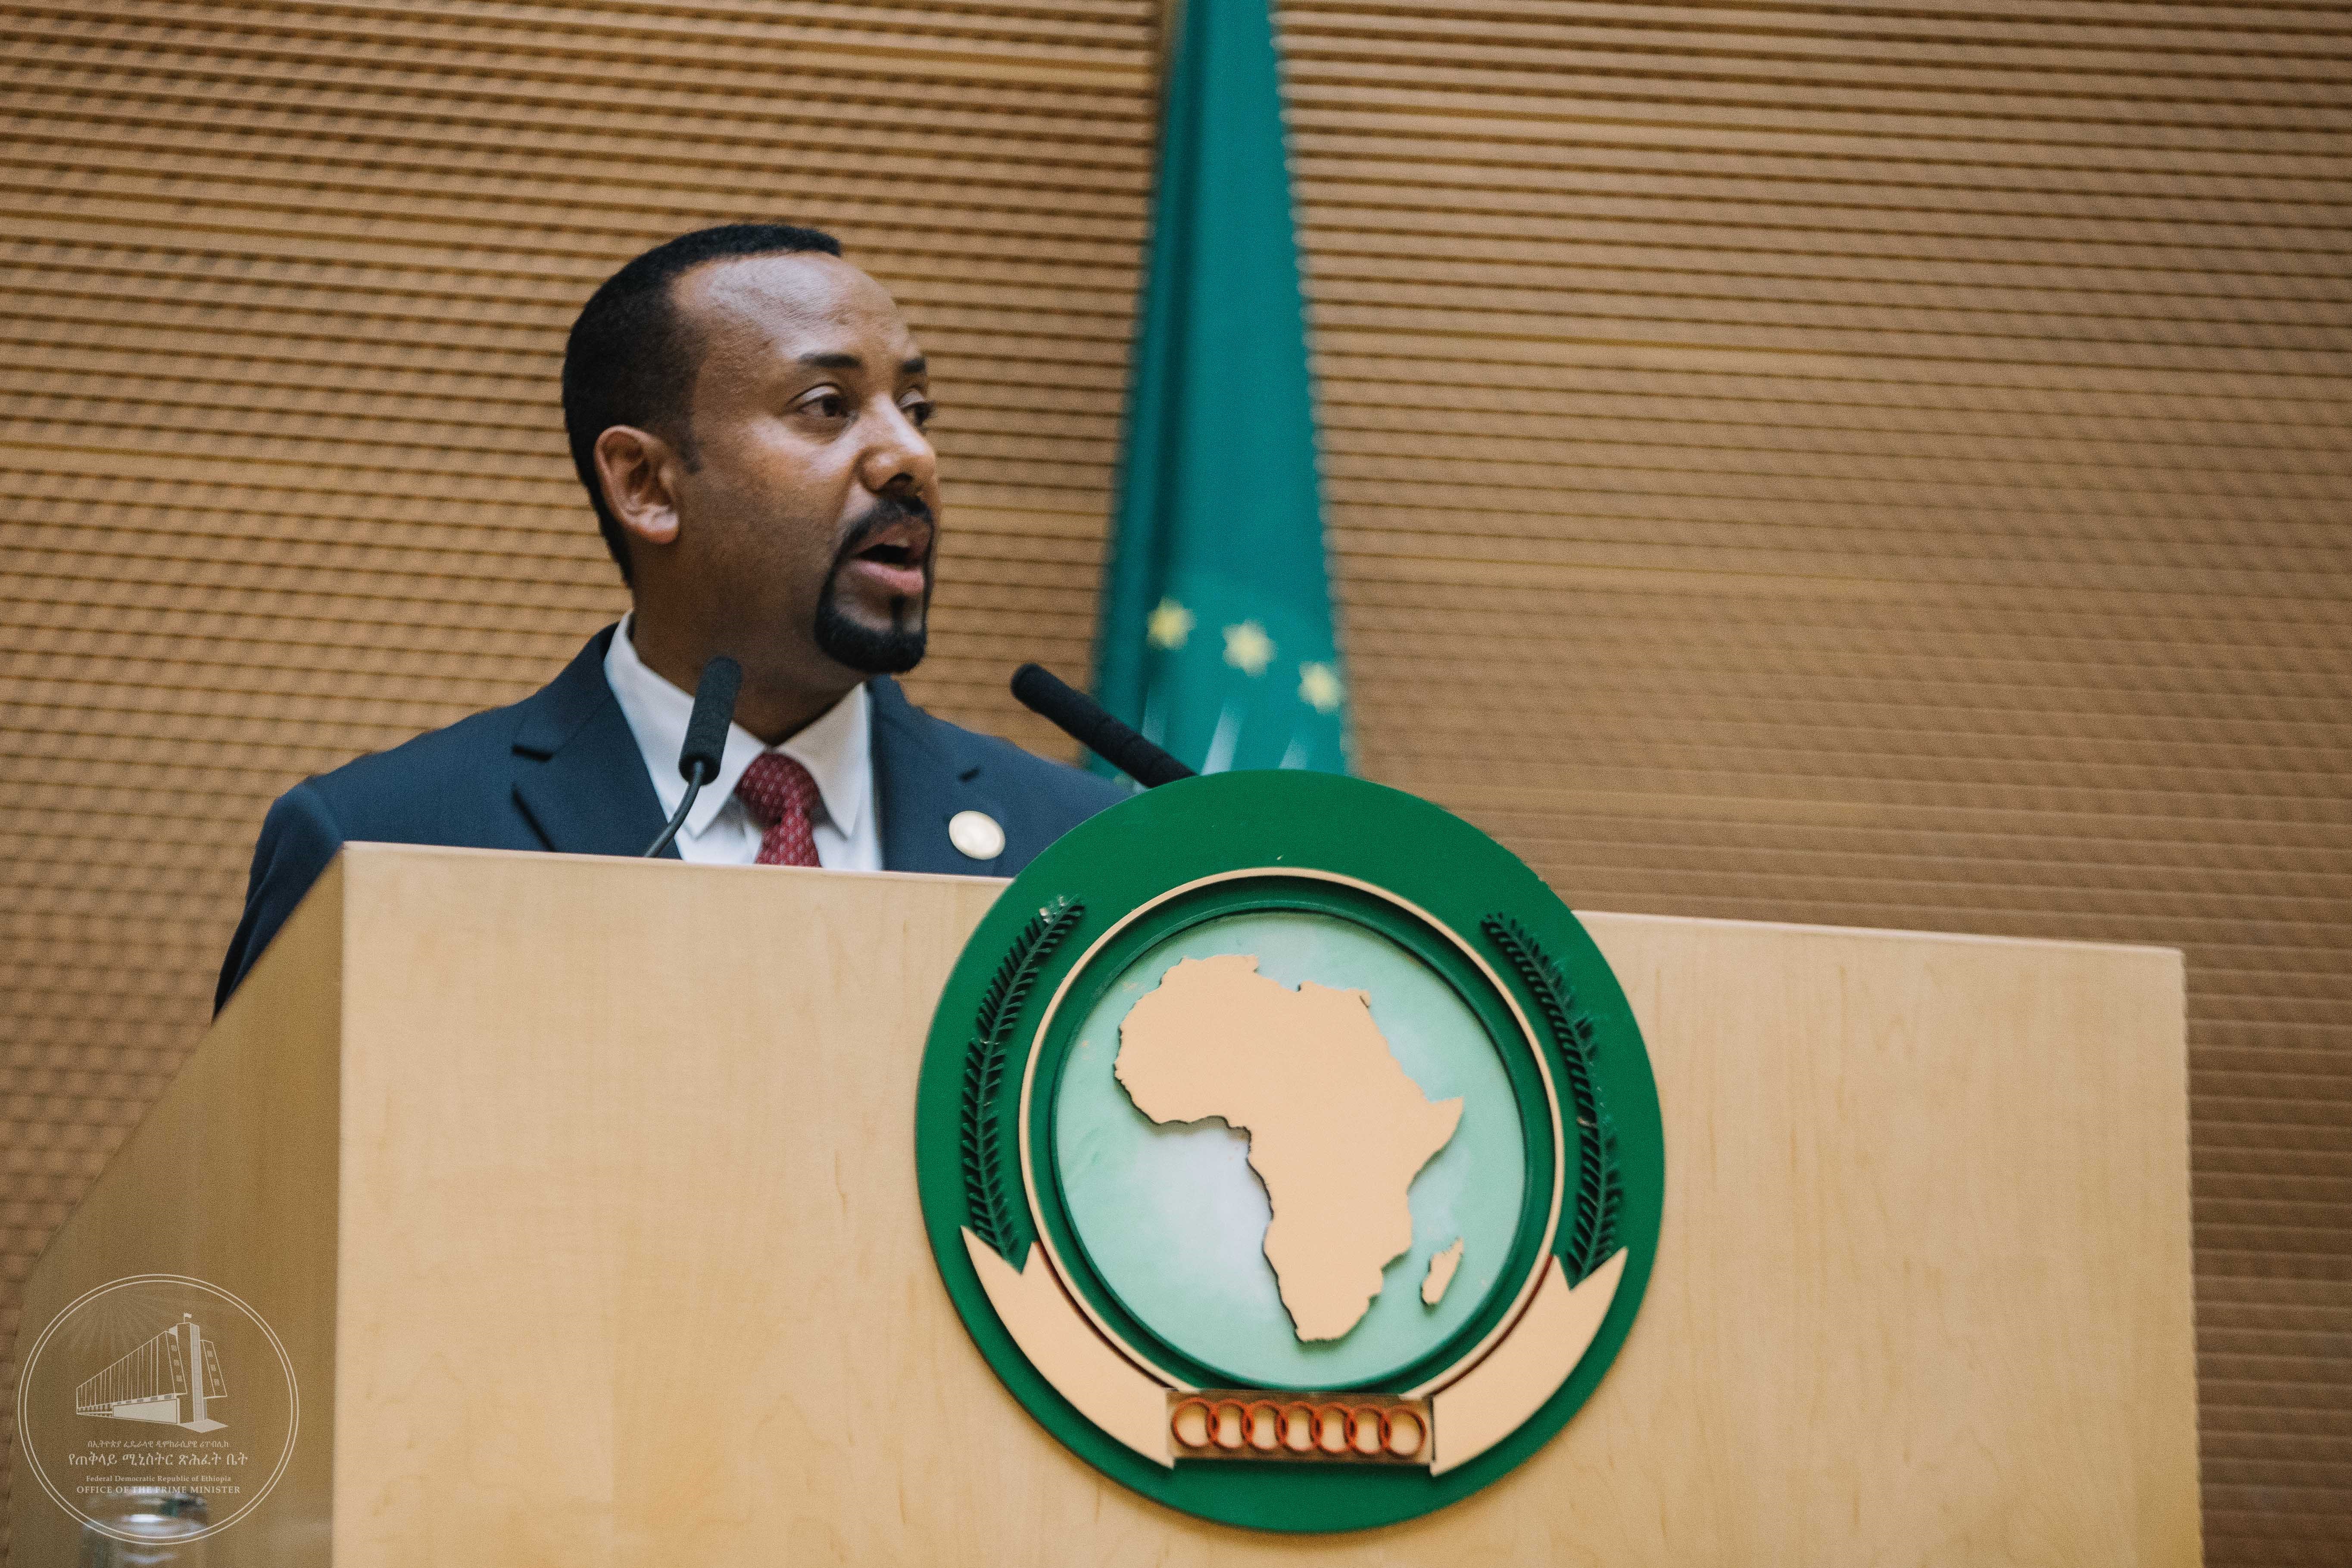 Prime Minister Abiy Ahmed at the African Union. Photo courtesy of Office of the Prime Minister - Ethiopia.